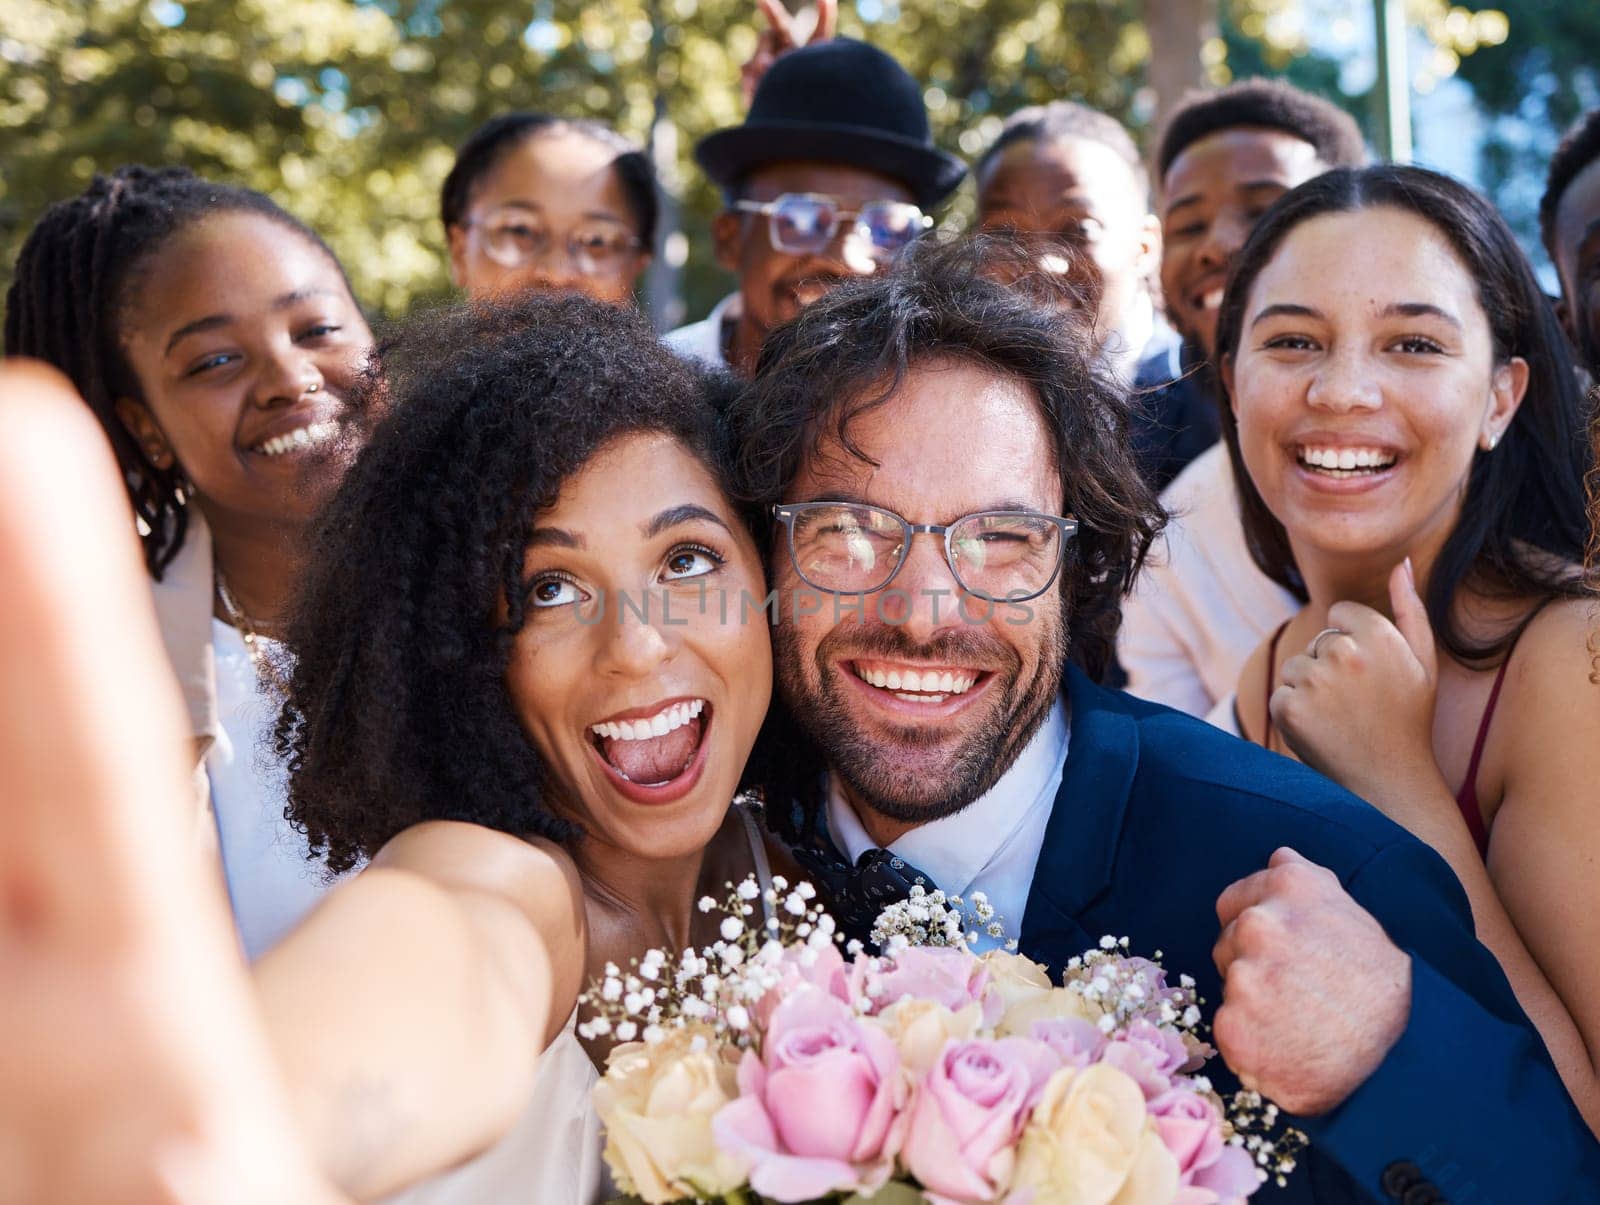 Friends, bride and groom with wedding selfie for outdoor ceremony celebration of happiness, love and joy. Marriage, happy and interracial relationship photograph of togetherness with excited guests.